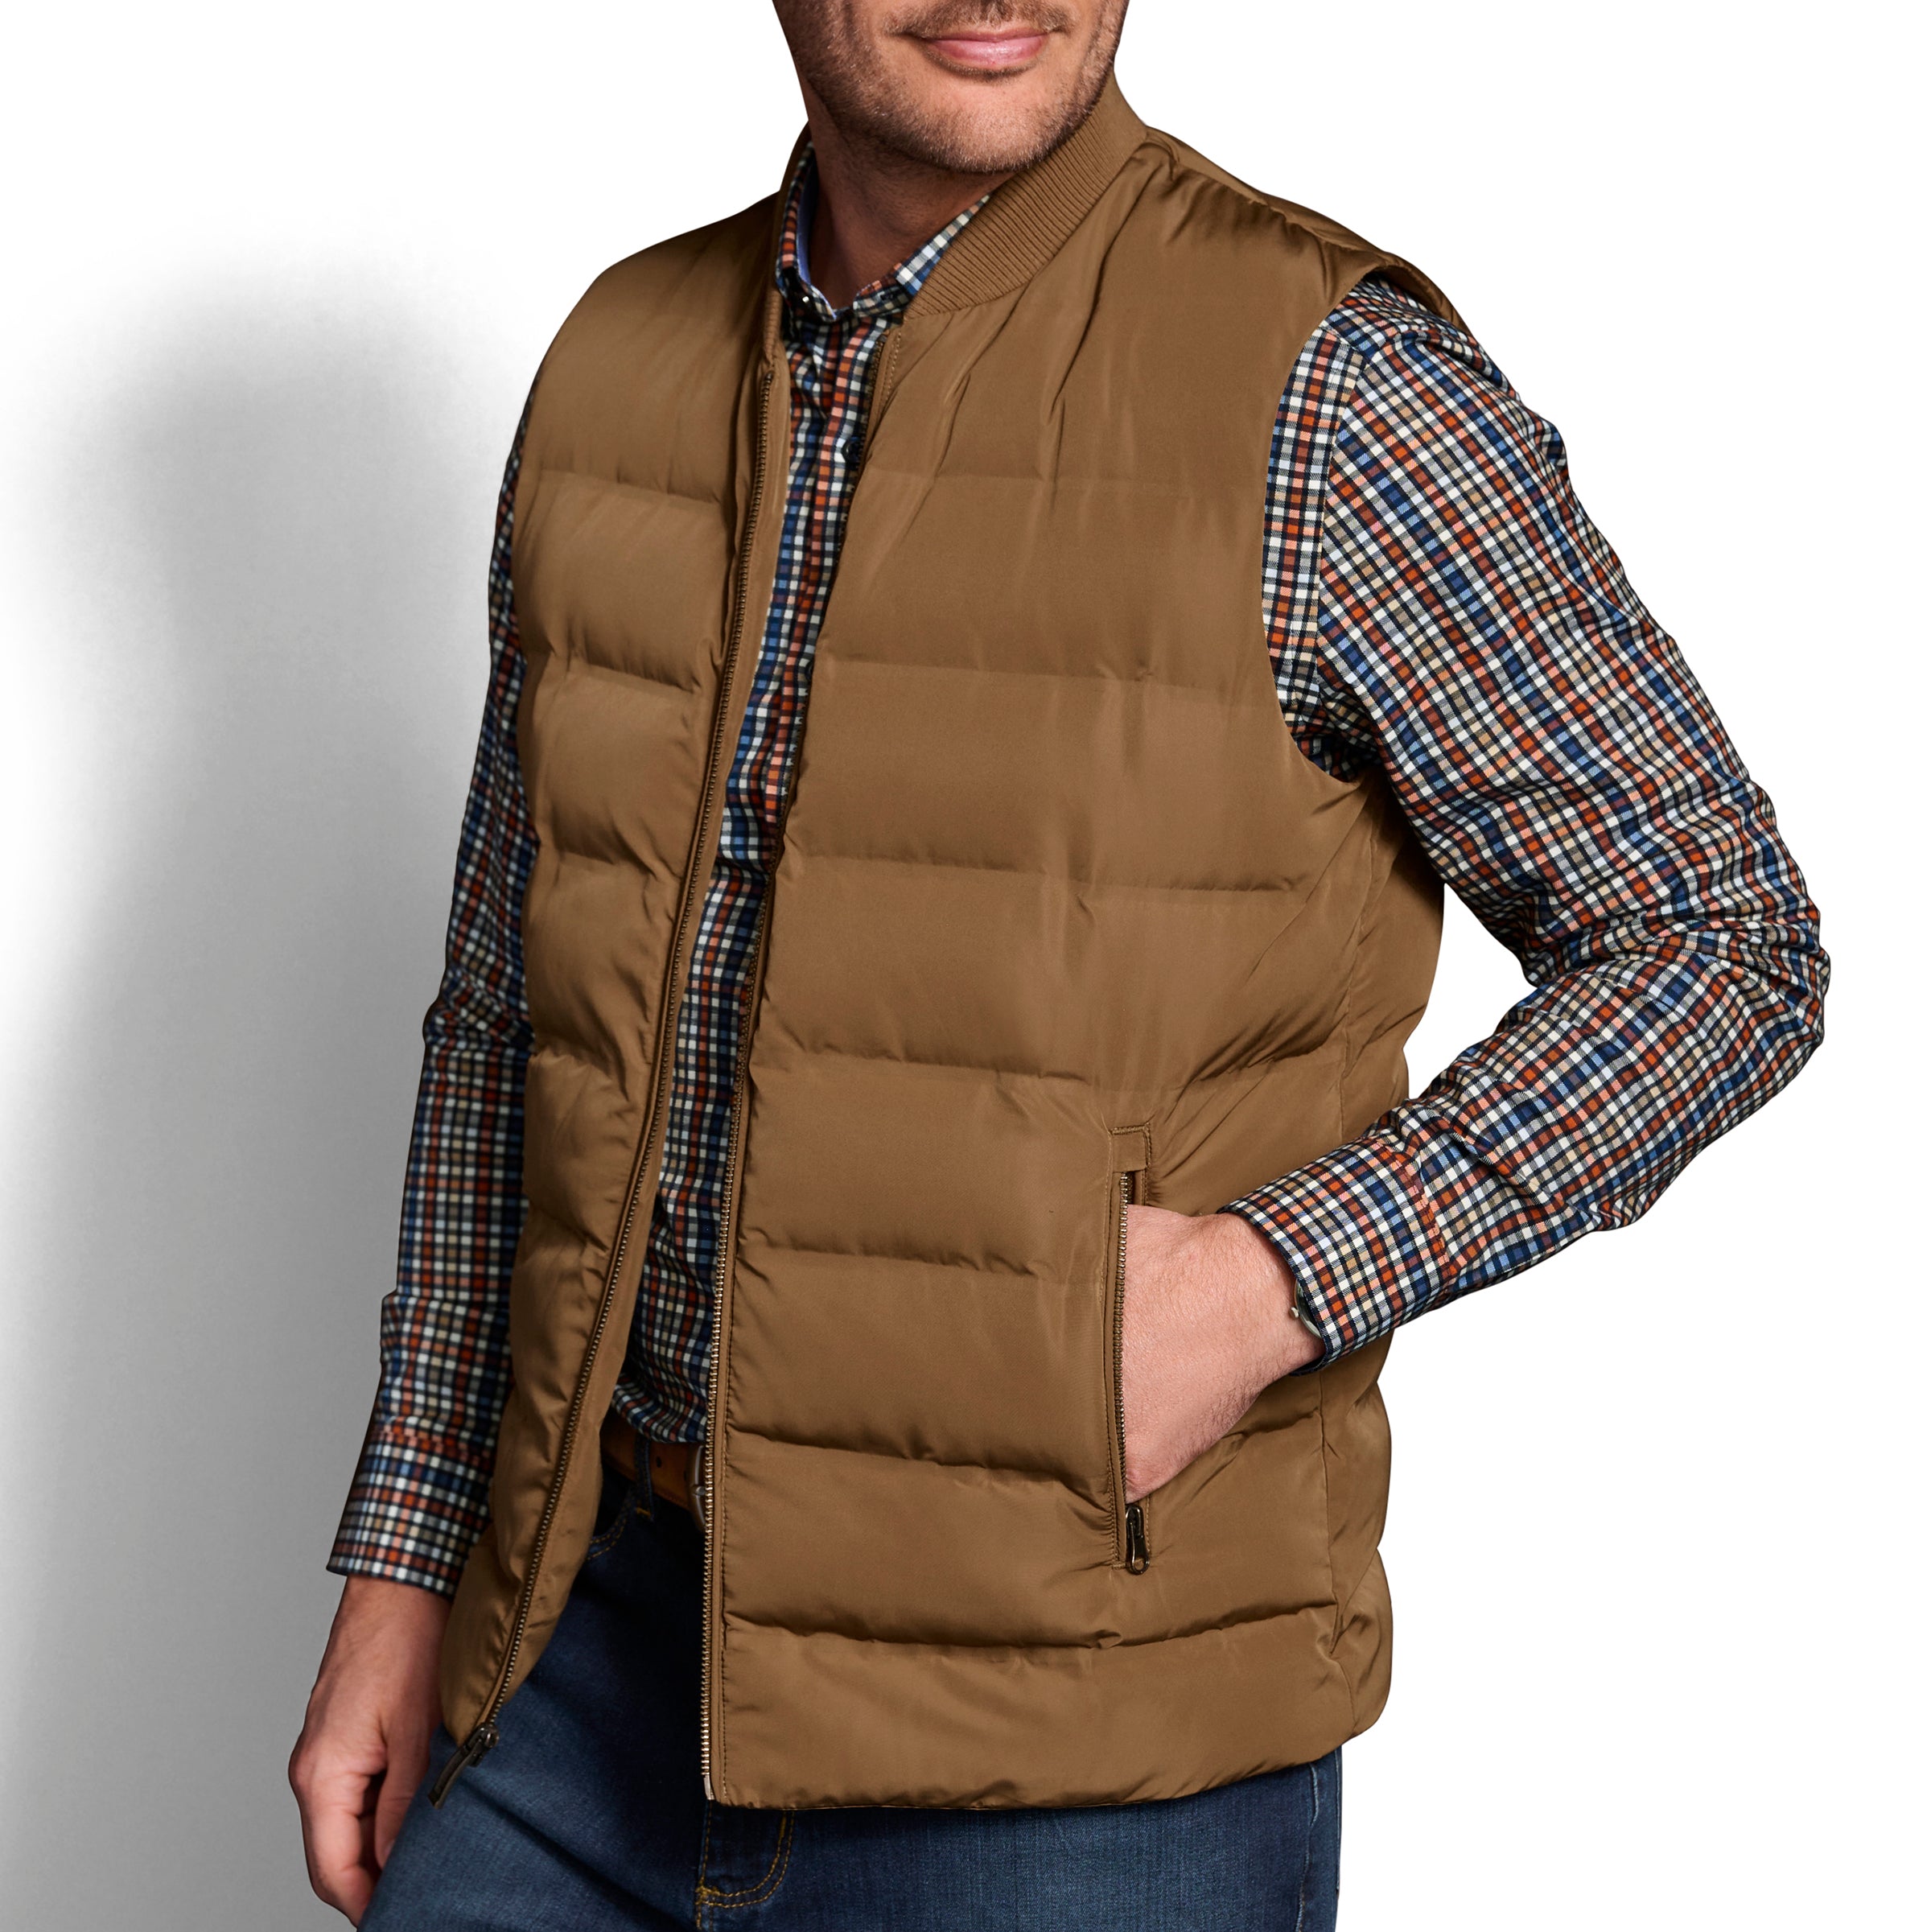 Channel Quilt Vest with Knit